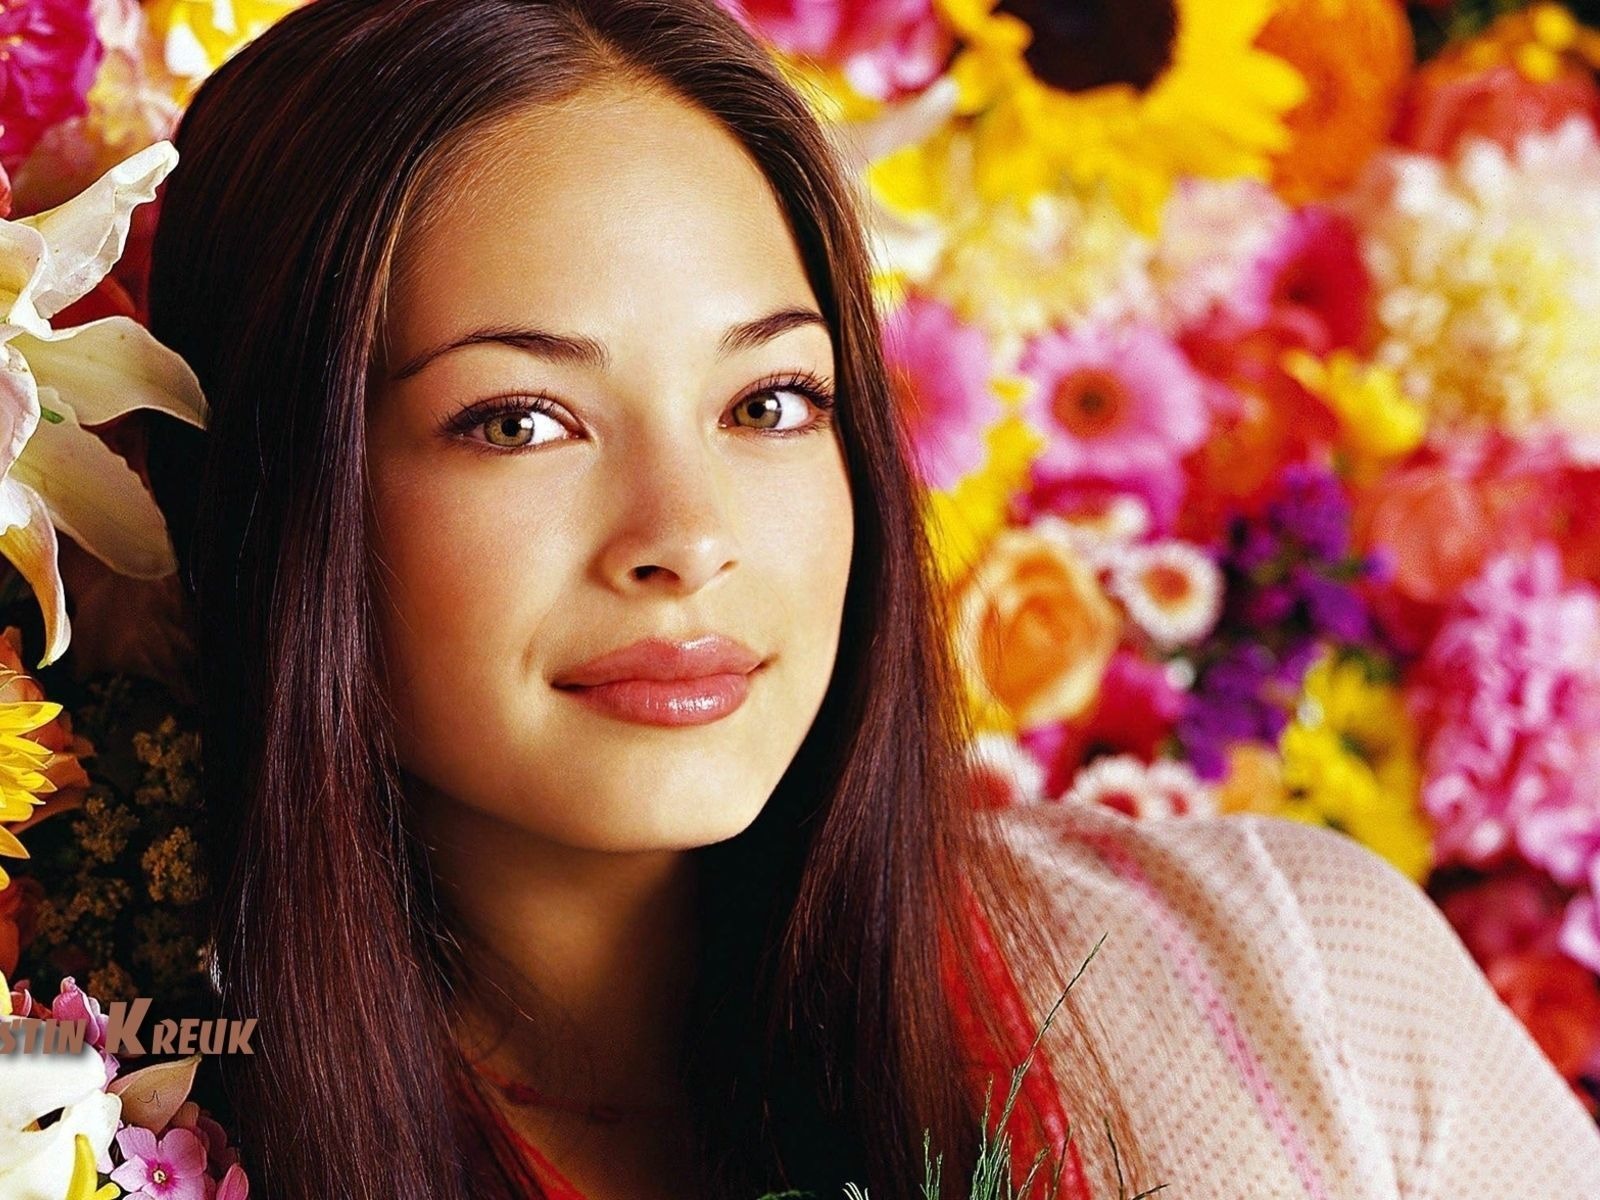 Kristin Kreuk #006 - 1600x1200 Wallpapers Pictures Photos Images